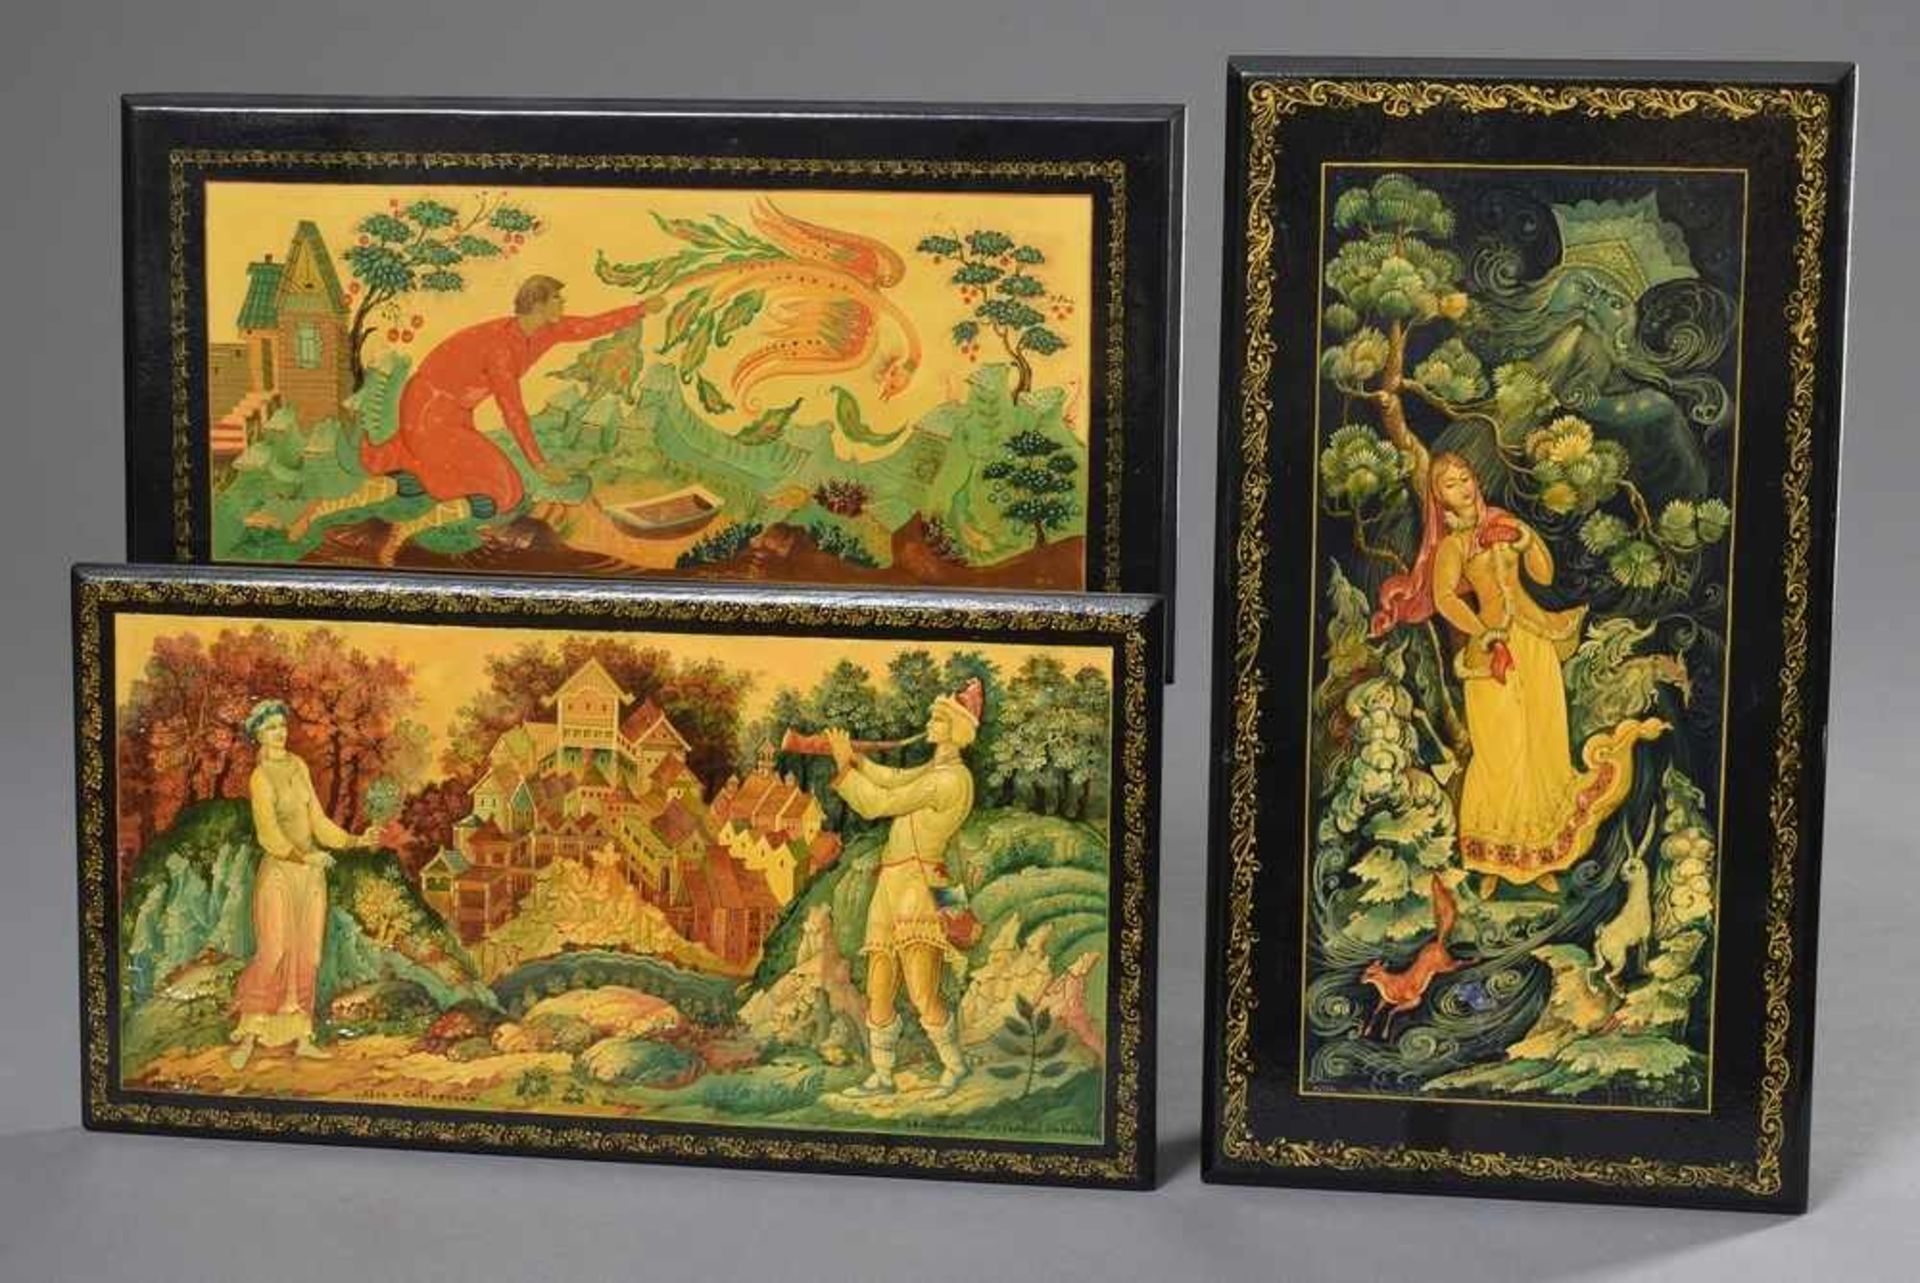 Various Mstjora lacquer panels "Boy with Firebird", "Father Frost's Red Nose" and "The Shepherd